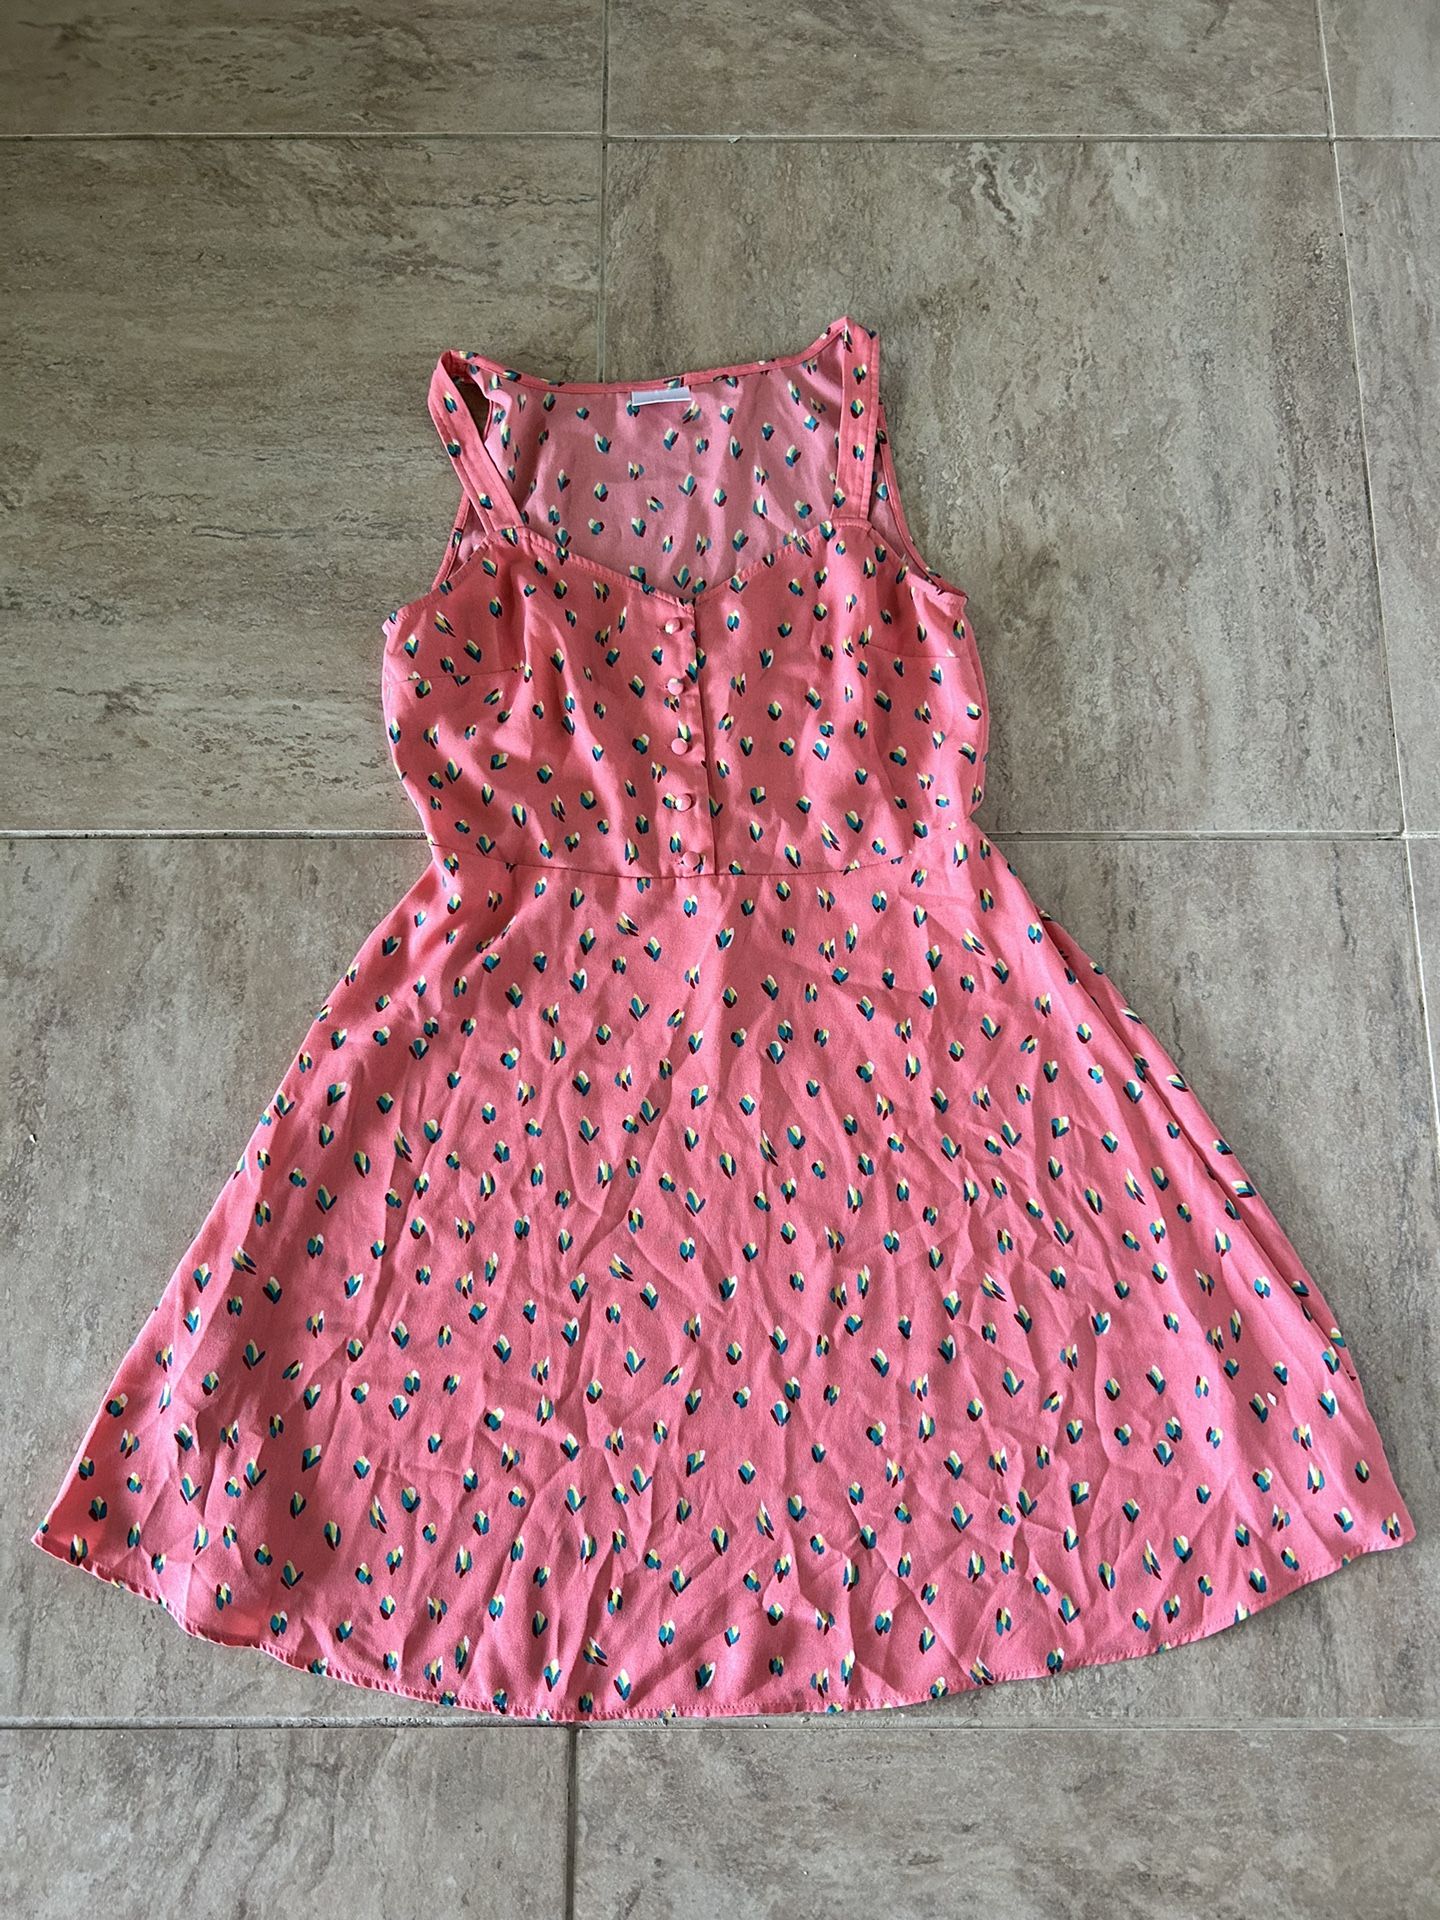 Abound Size Small Salmon Pink Short Knee Length Summer Dress 